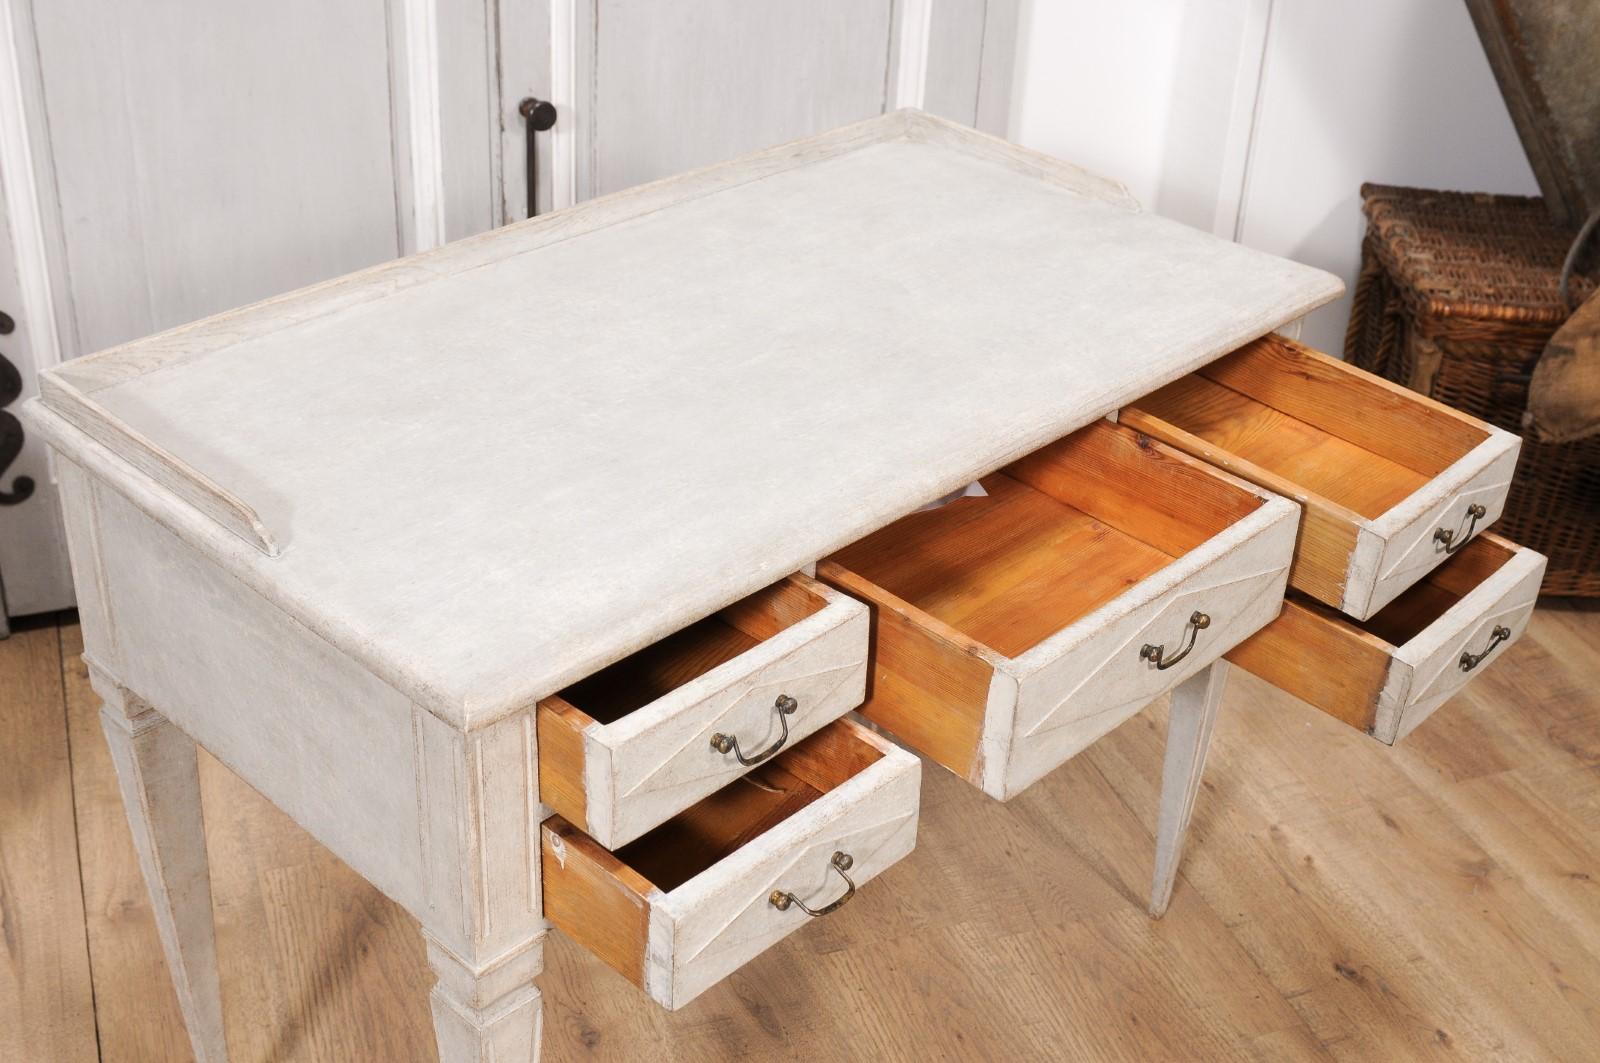 19th Century 1880s Swedish Gustavian Style Painted Desk with Five Drawers and Tapered Legs For Sale